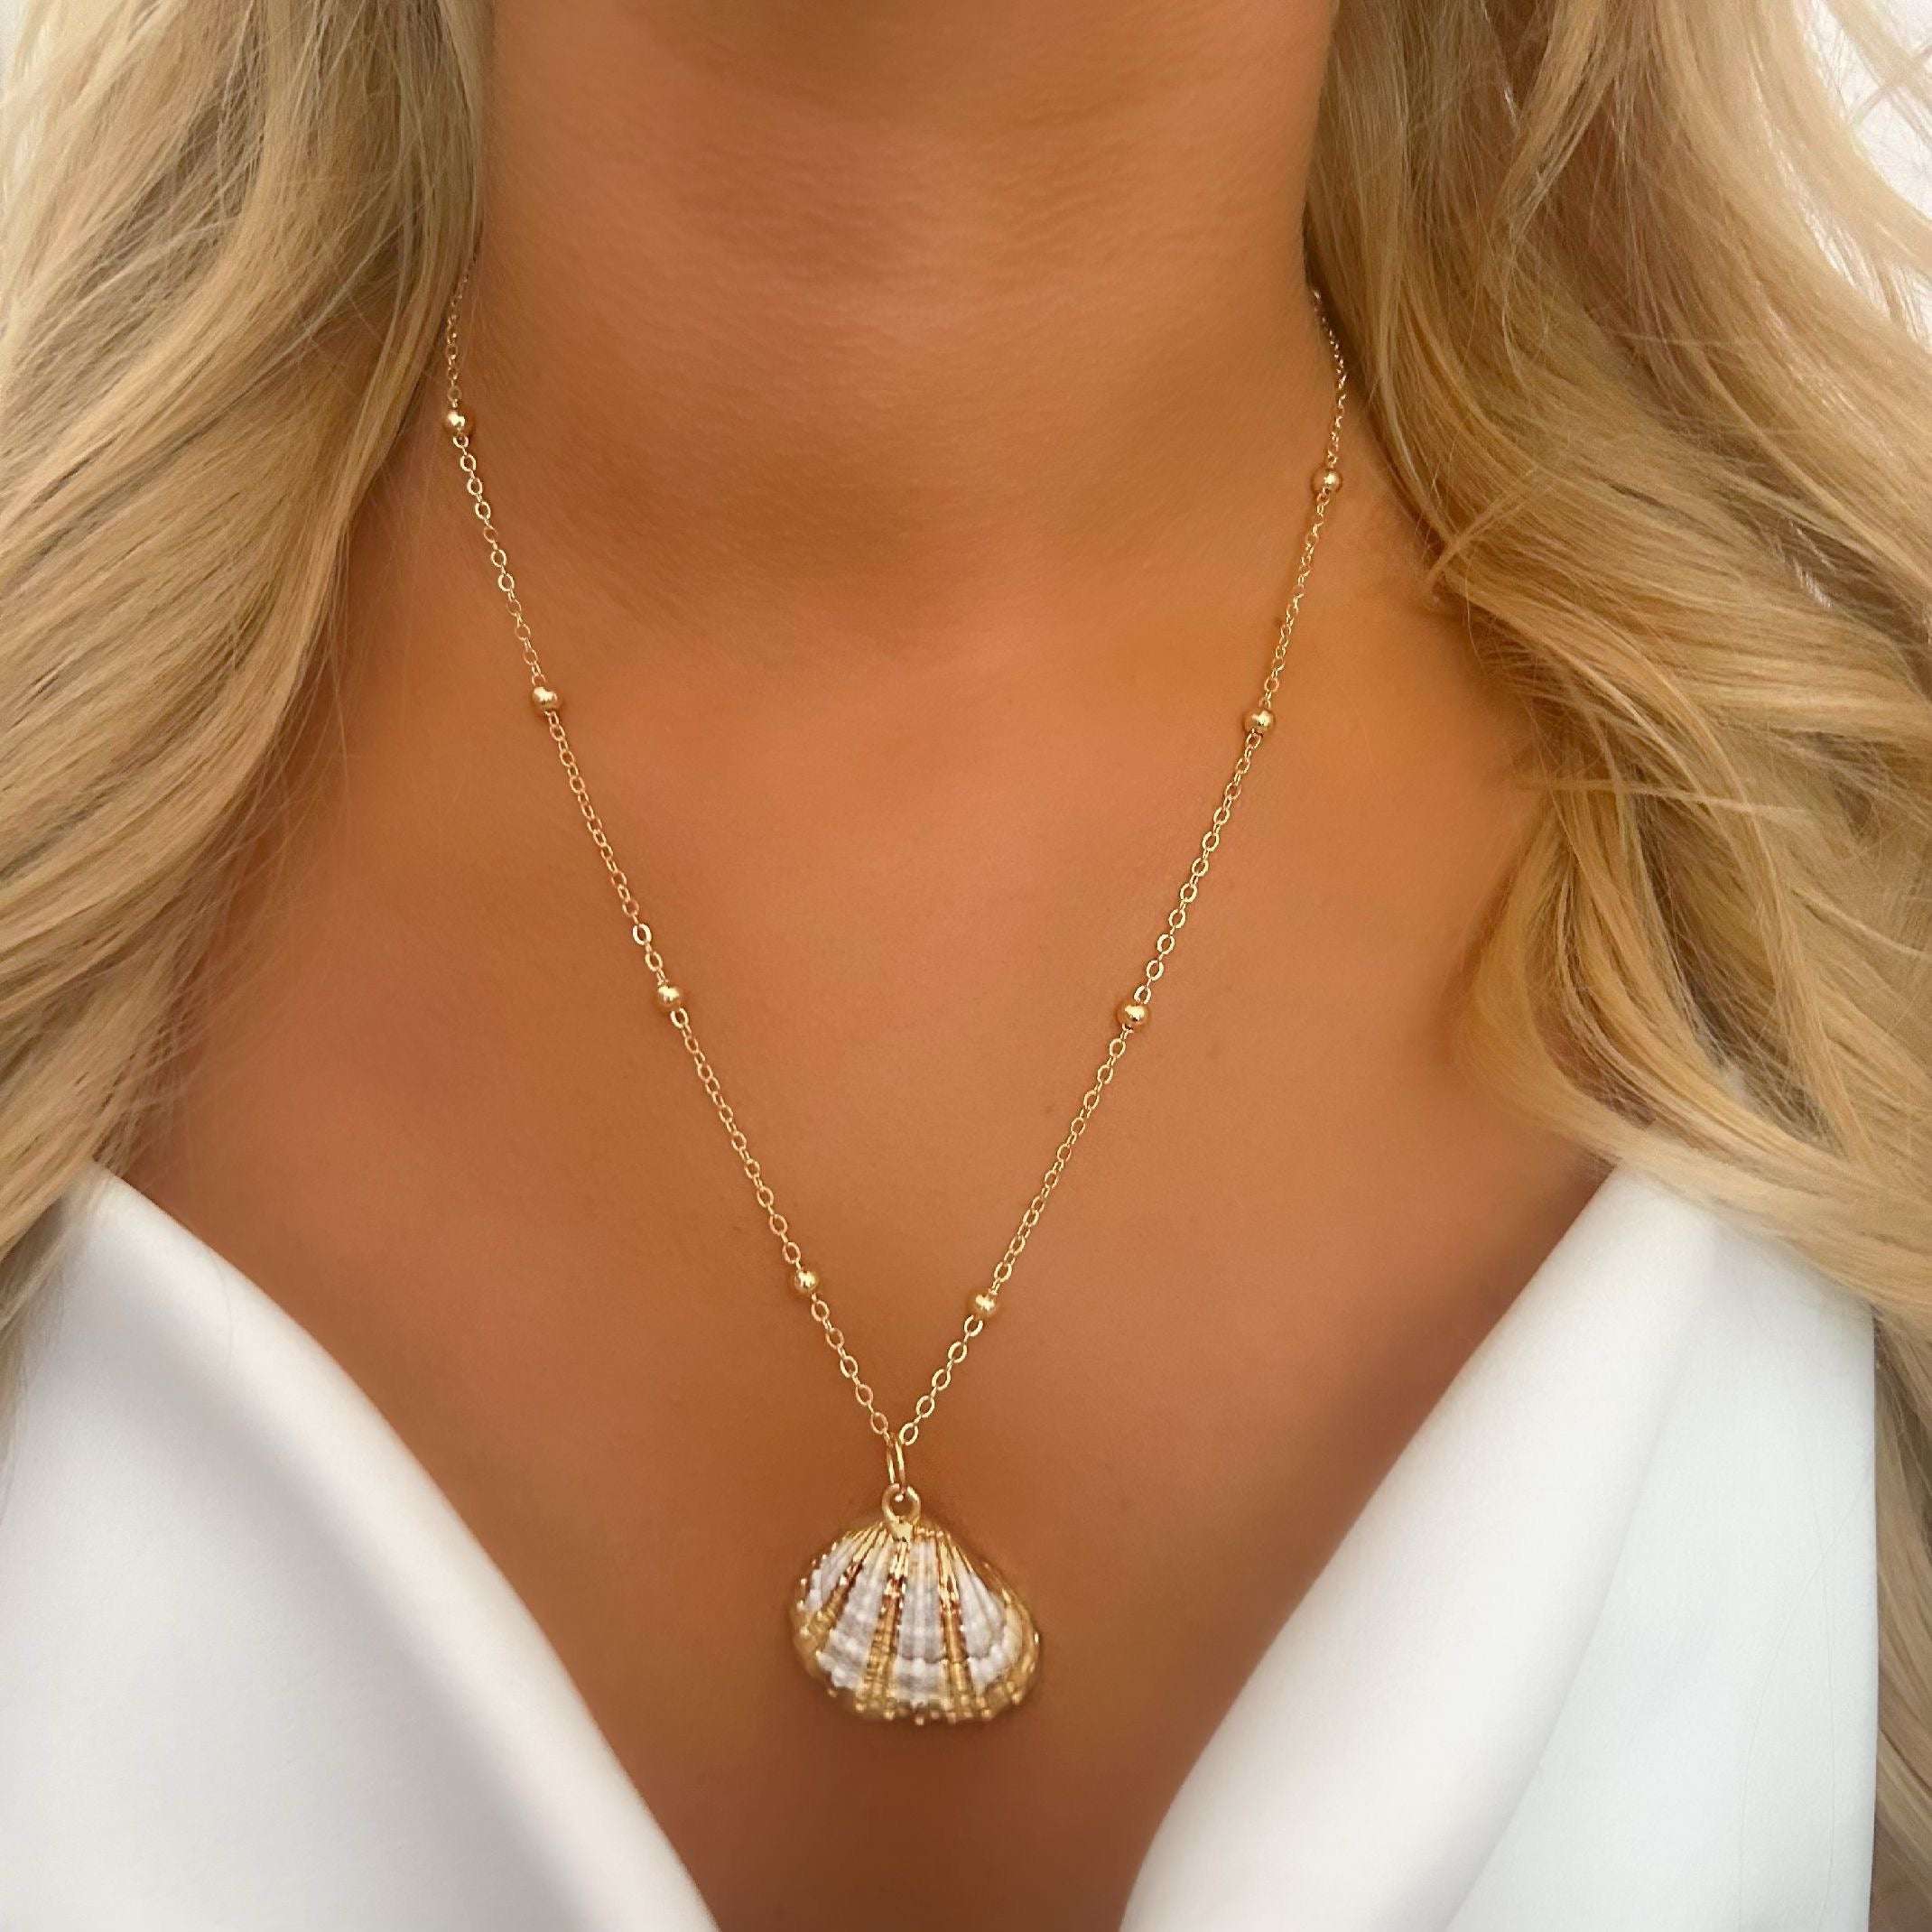 Shell necklace 